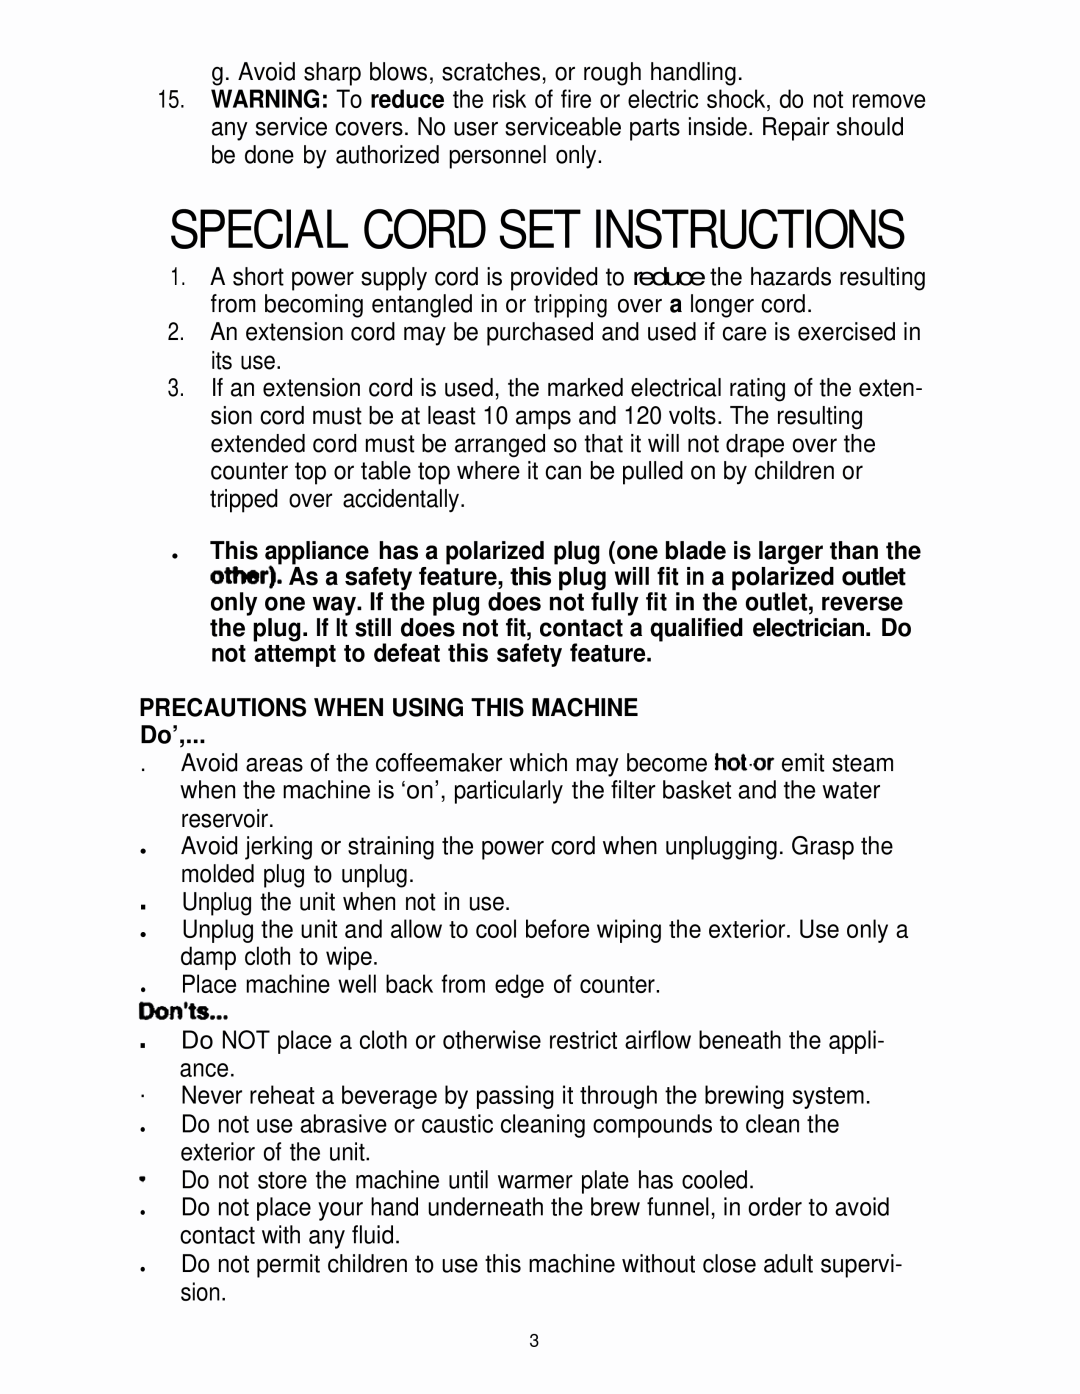 Mr. Coffee SR10, SRX55 manual PRECAUTIONS WHEN USING THIS MACHINE Do’, Don%, Special Cord Set Instructions 